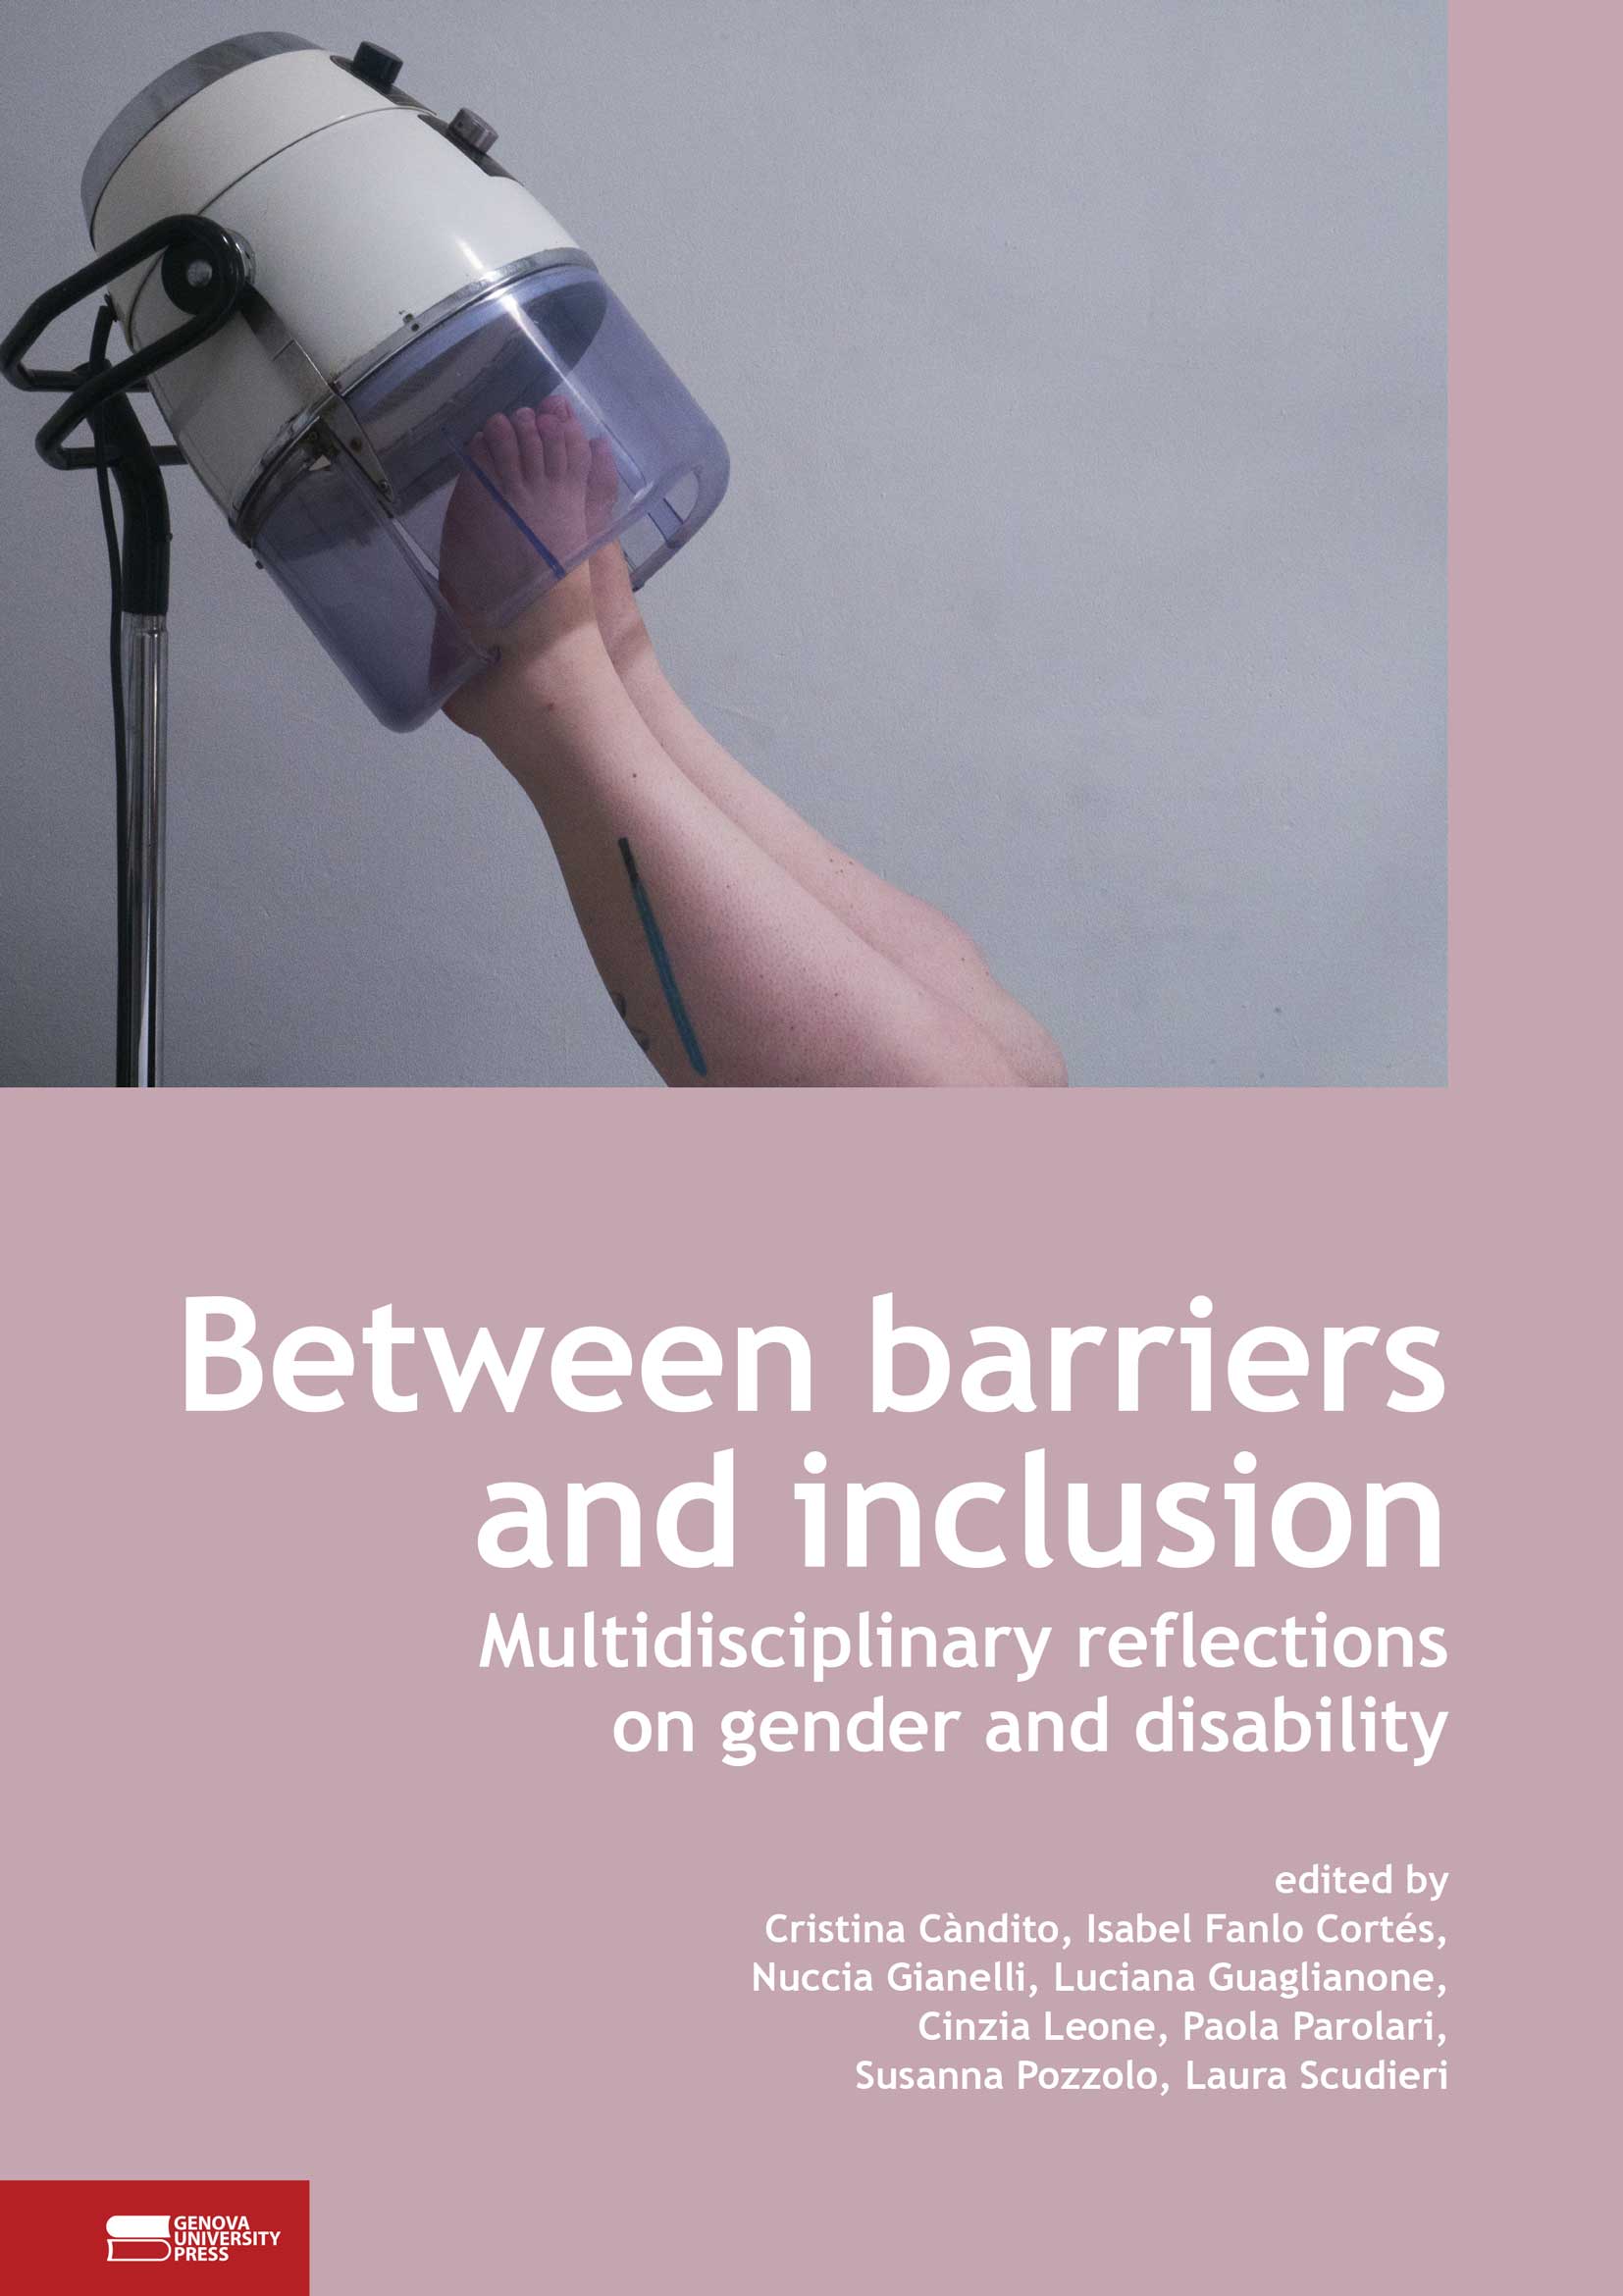 Between barriers and inclusion